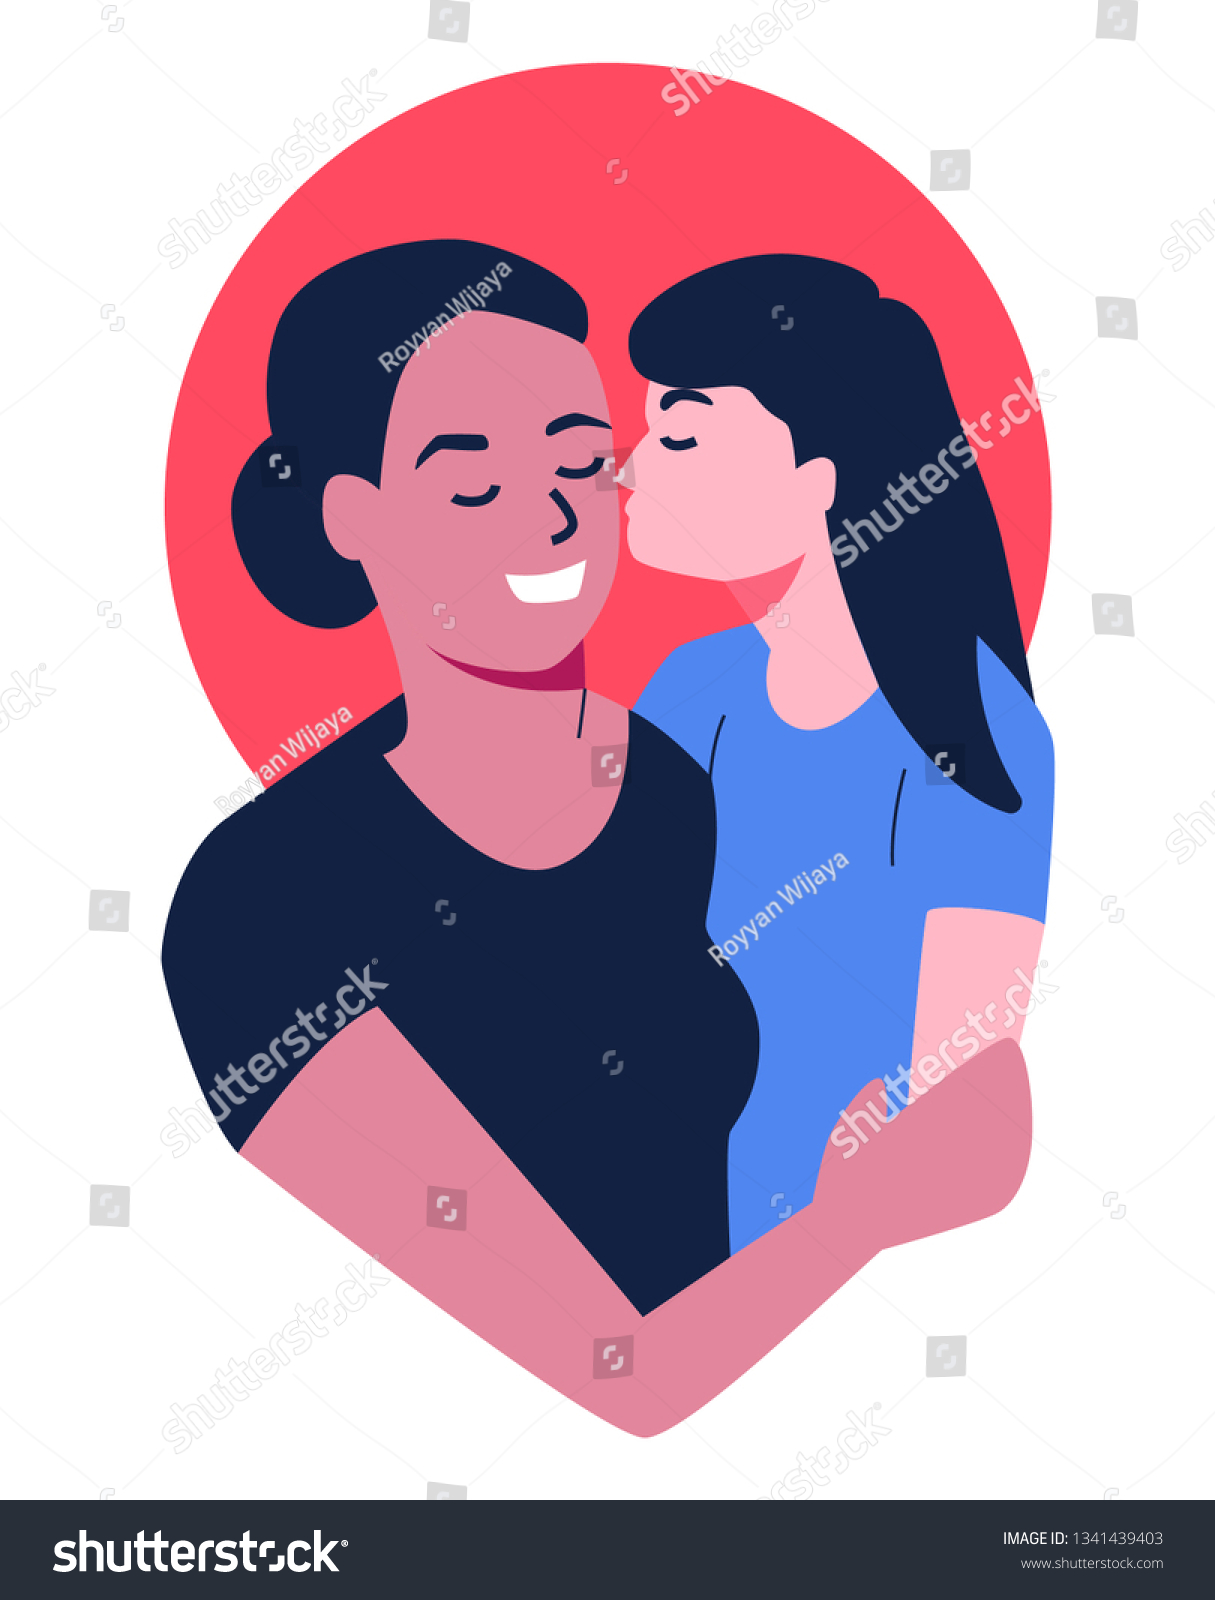 Daughter Kissing Her Mother And Hug Each Other Royalty Free Stock Vector 1341439403 